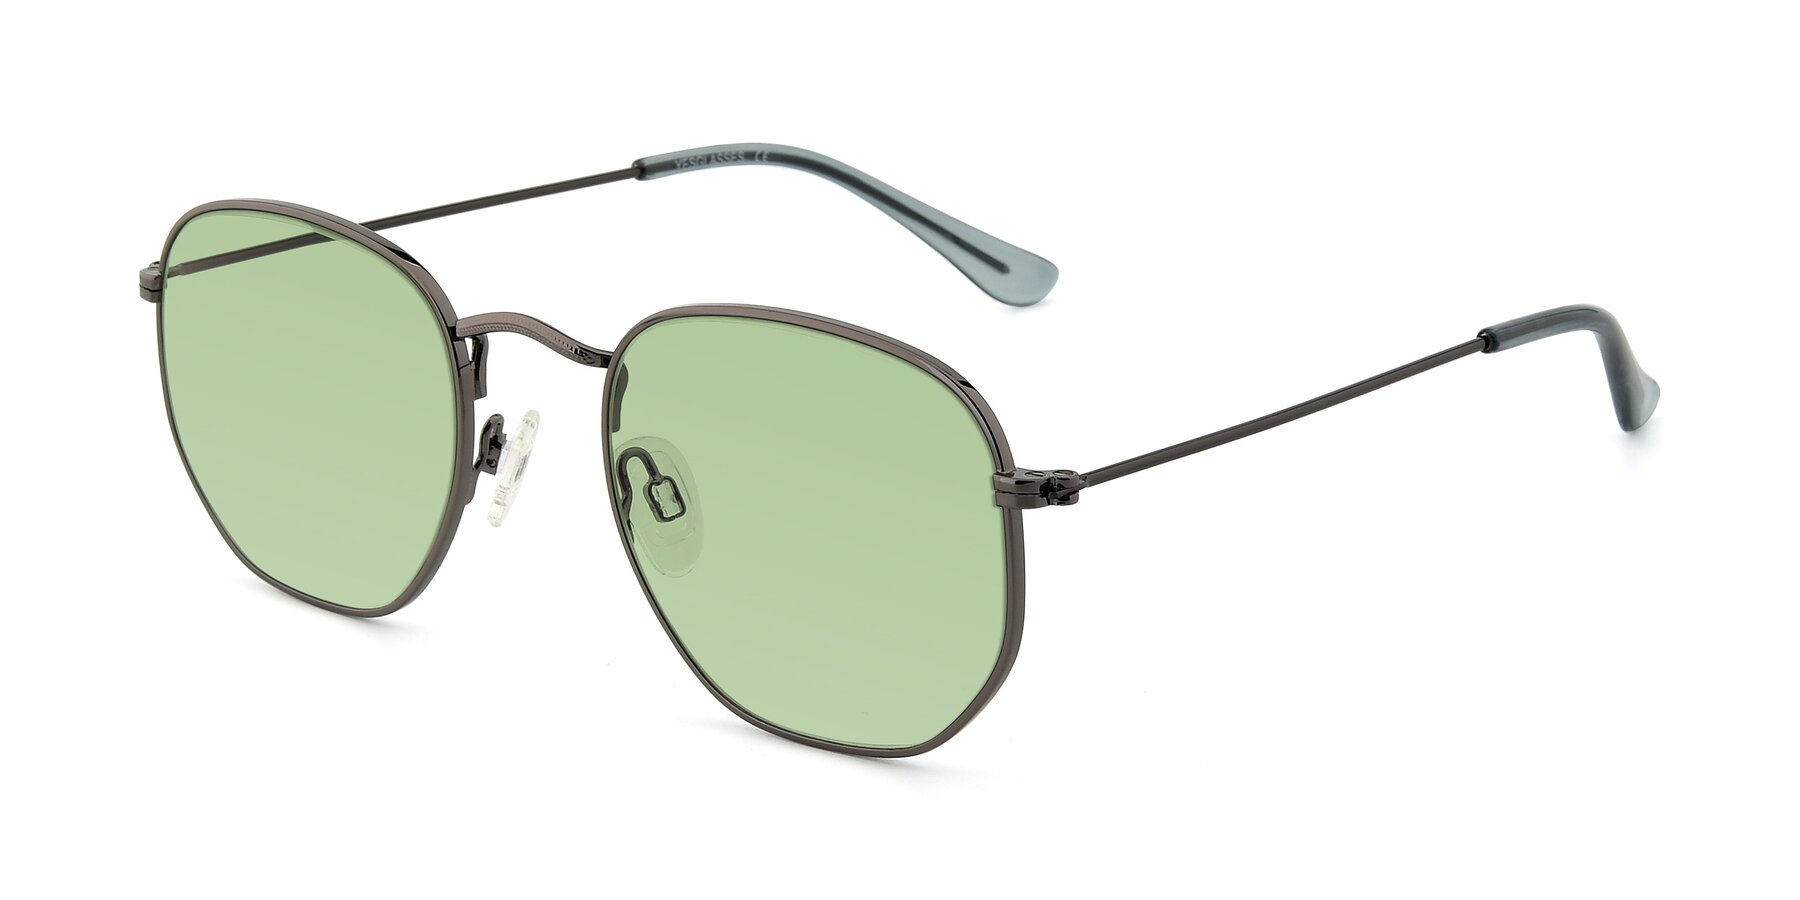 Angle of SSR1944 in Grey with Medium Green Tinted Lenses